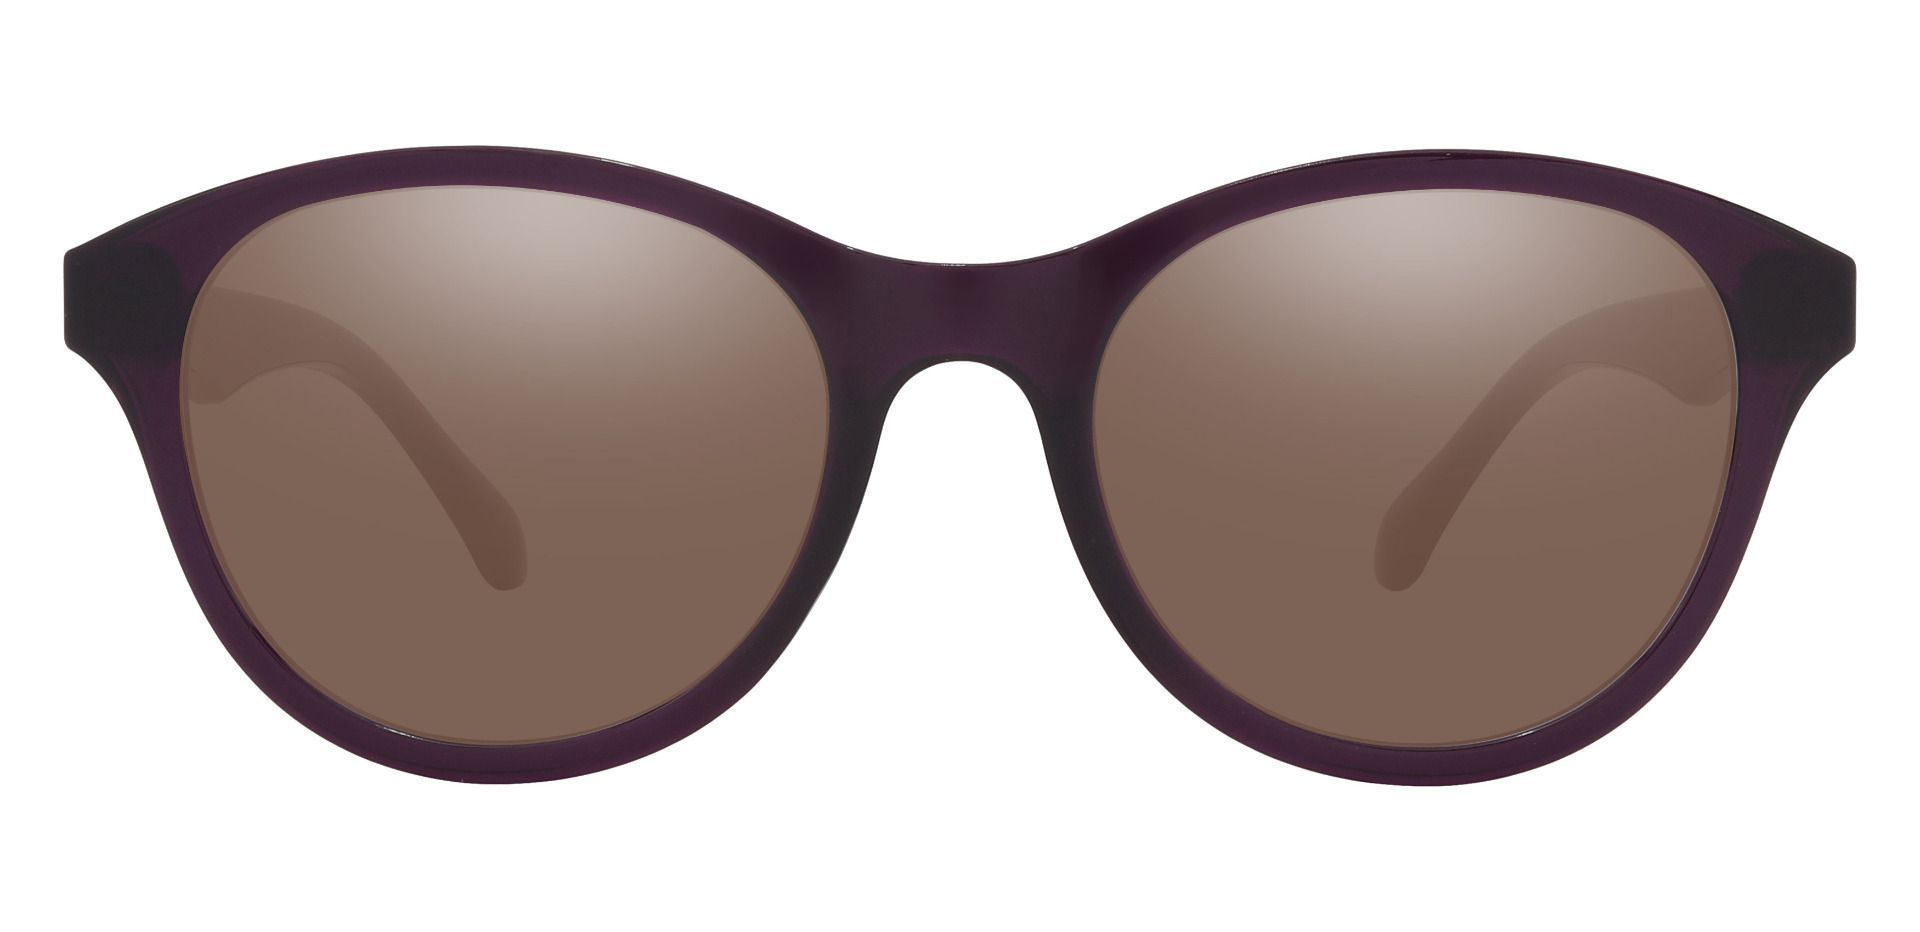 Angelina Round Prescription Sunglasses - Purple Frame With Brown Lenses